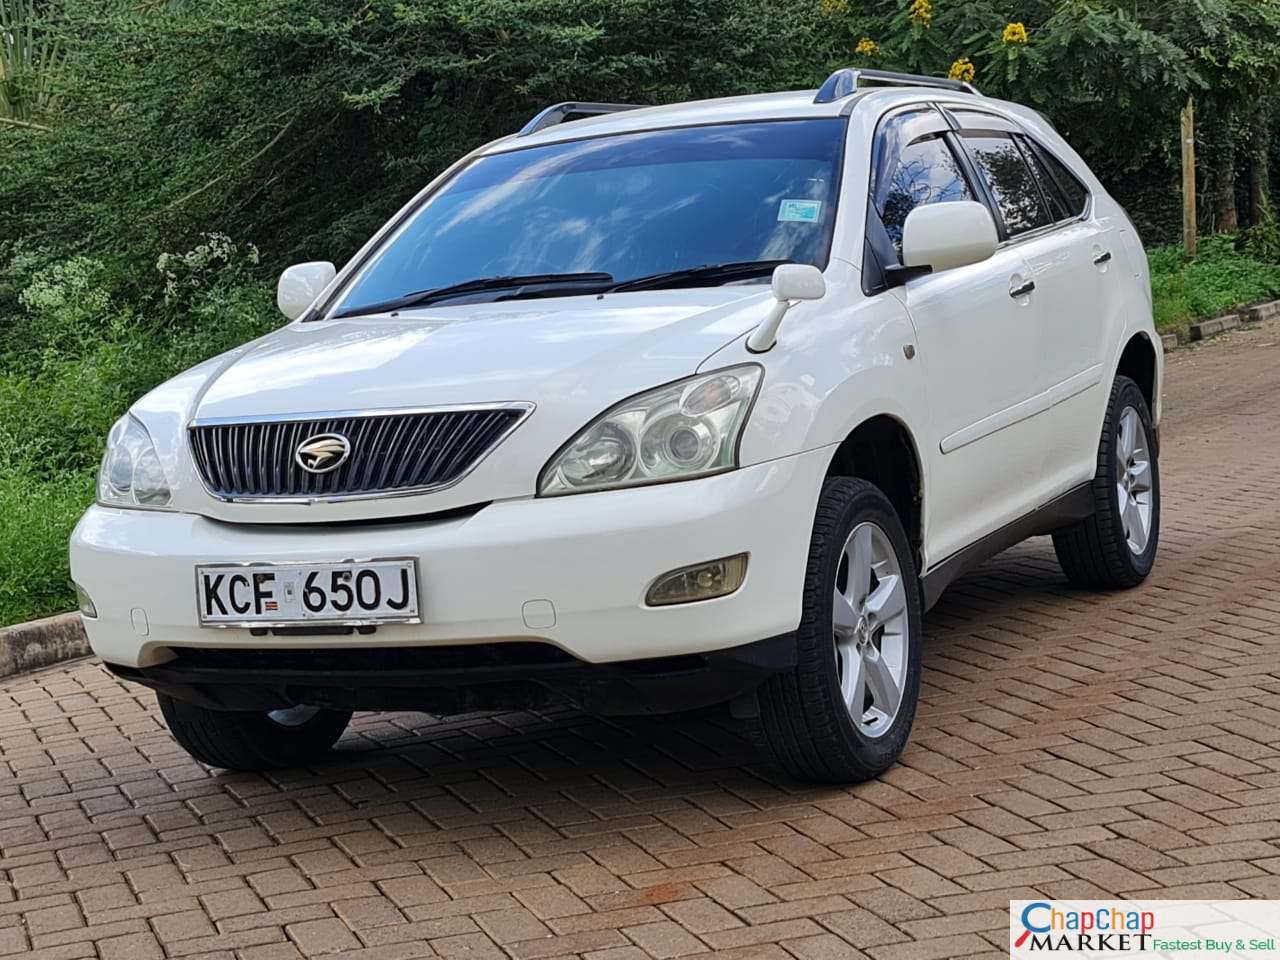 Cars For Sale/Vehicles-Toyota HARRIER QUICKEST SALEðŸ”¥ You Pay 40% Deposit Trade in OK EXCLUSIVE